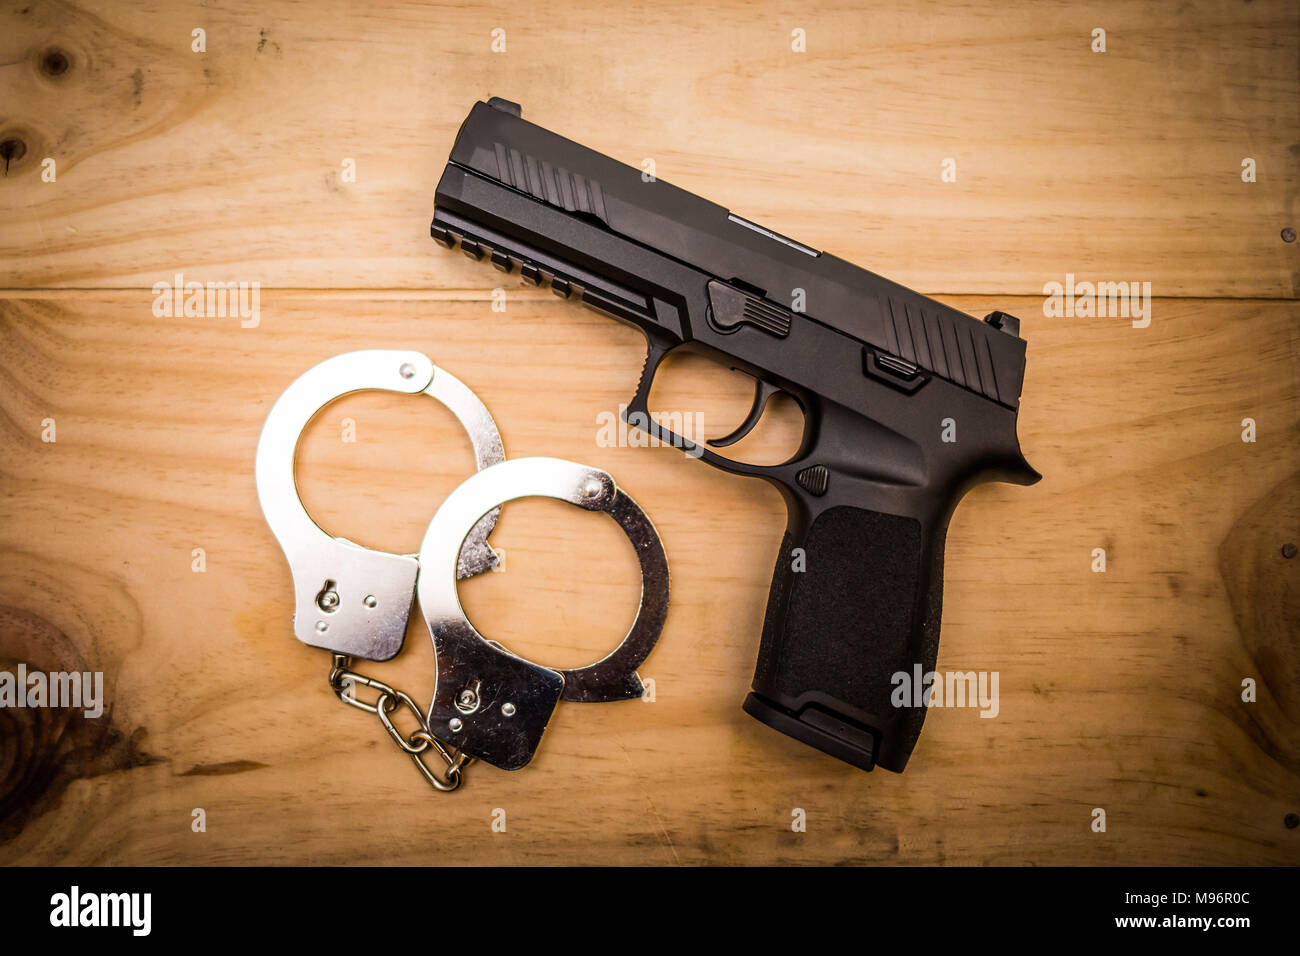 Hand gun with hand cuffs on wooden surface concept Stock Photo